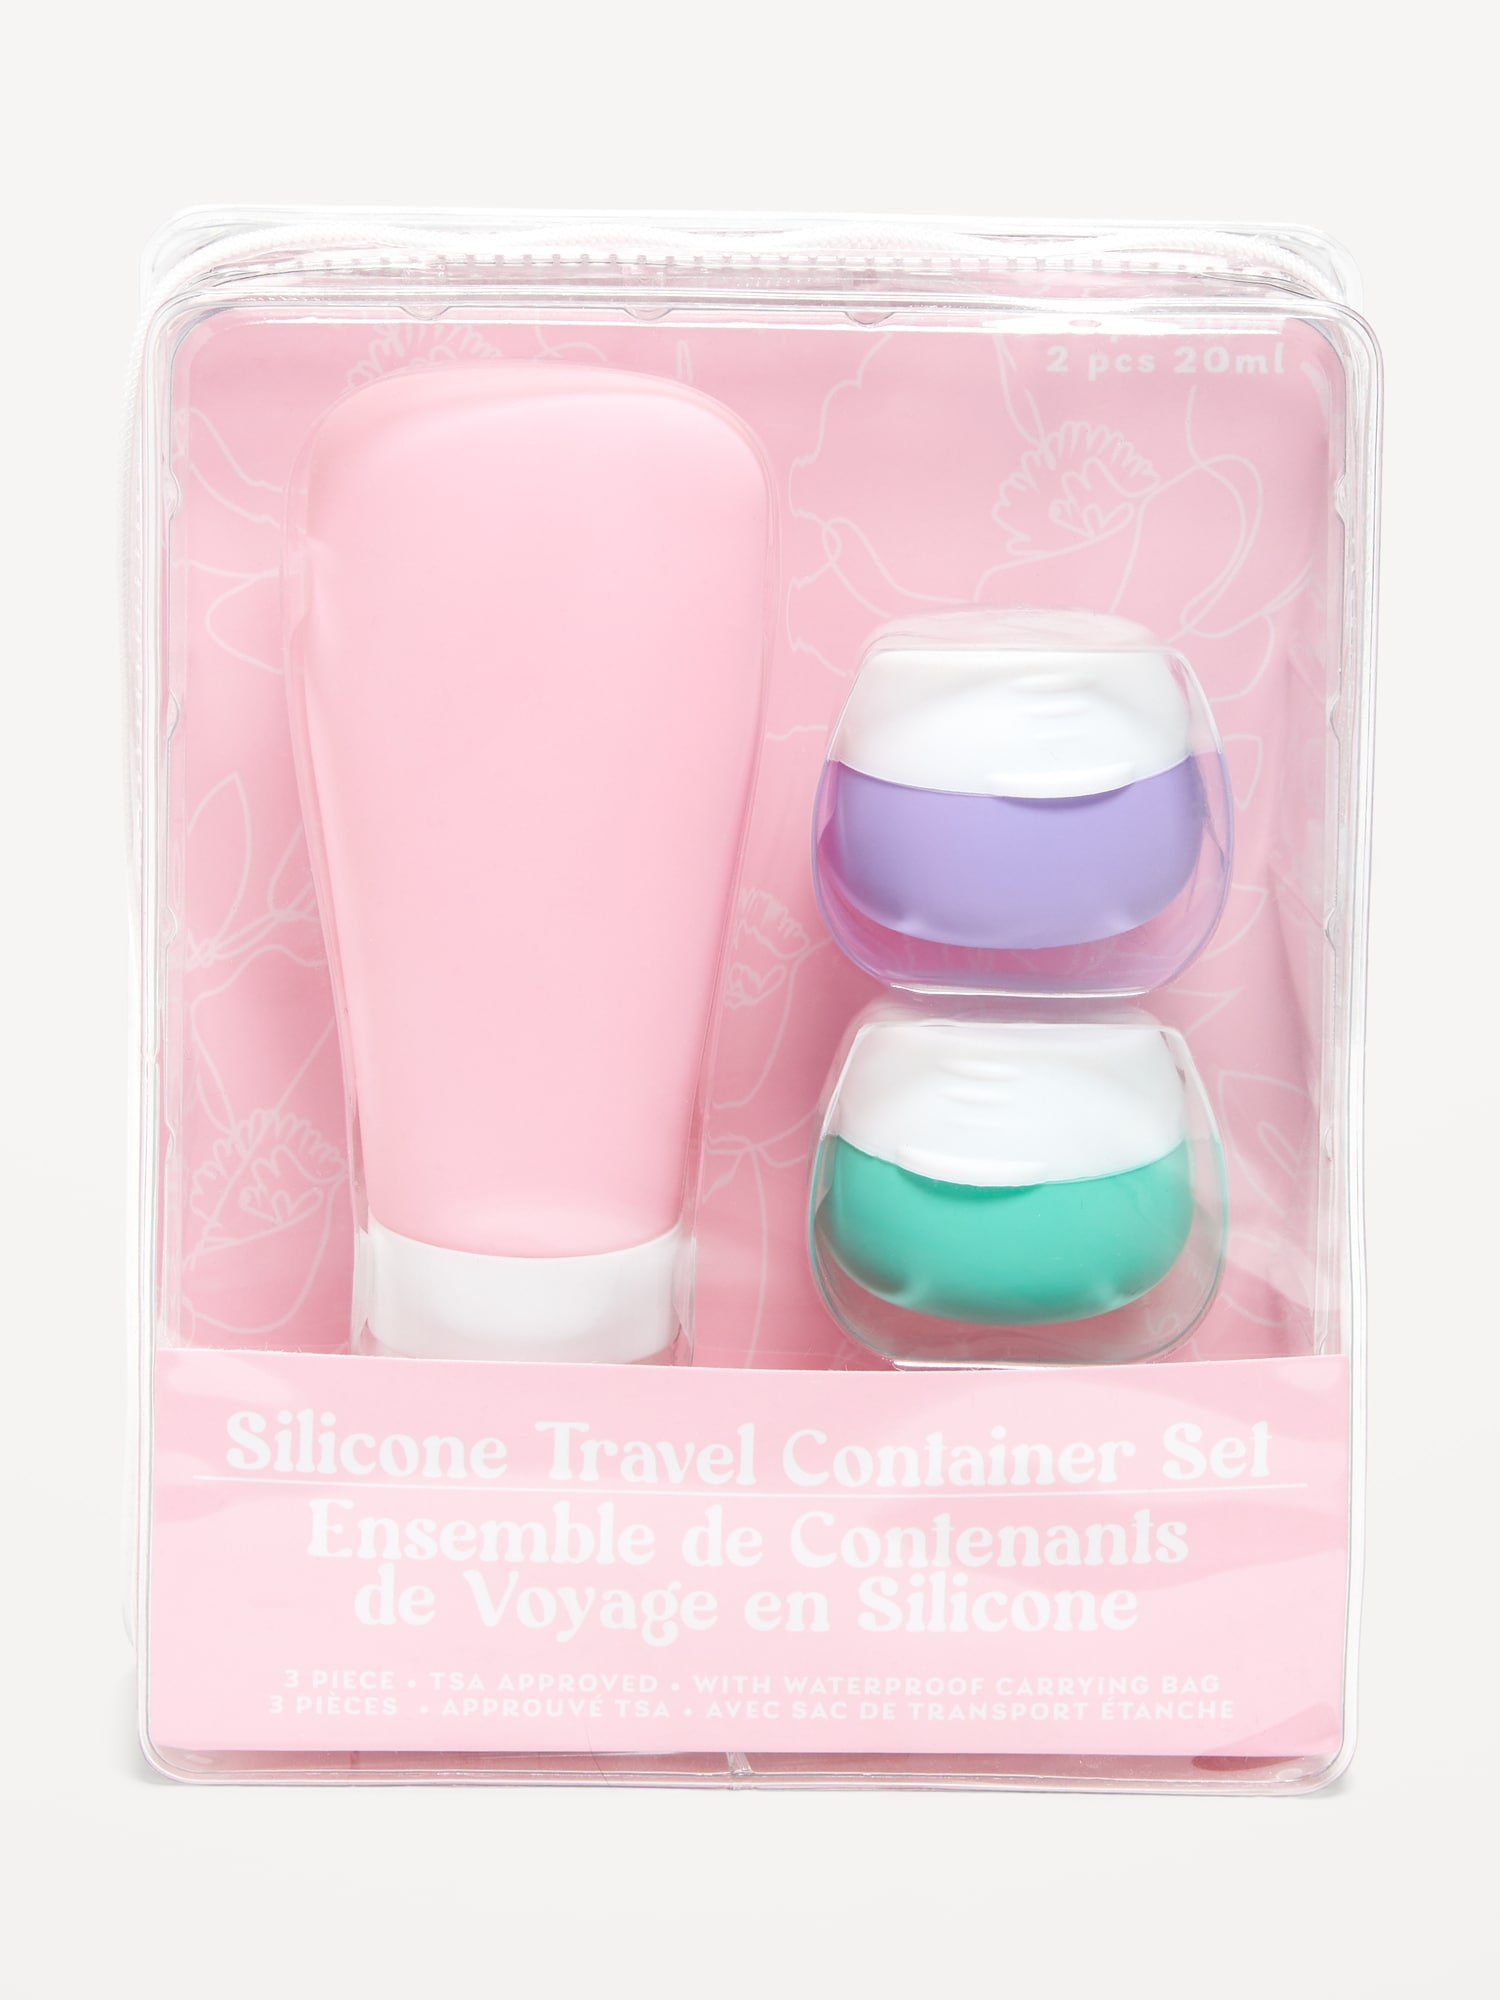 Outtek Silicone Travel Container Set